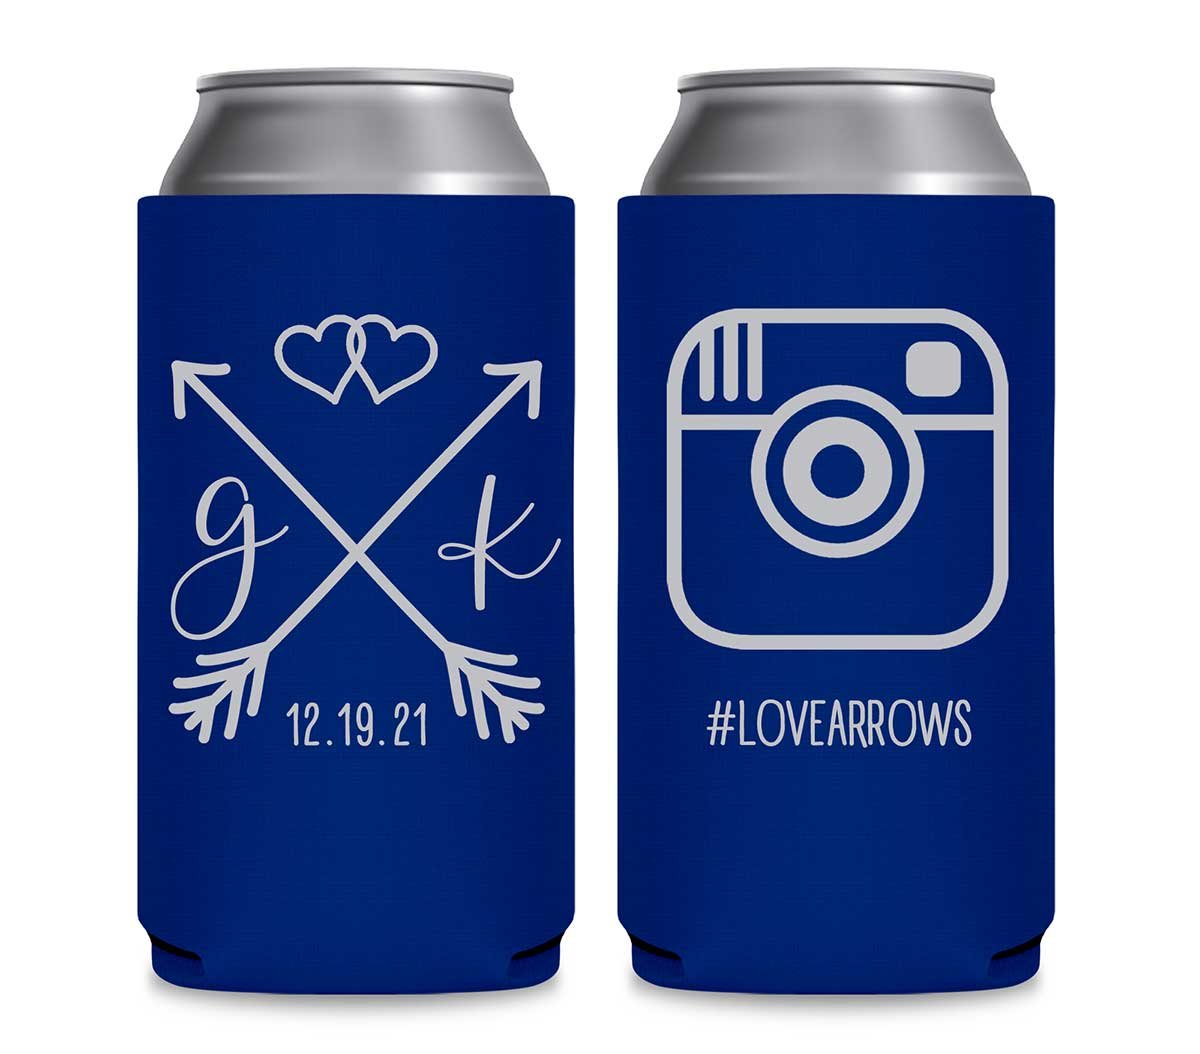 Love Arrows 1C Instagram Hashtag Foldable 12 oz Slim Can Koozies Wedding Gifts for Guests